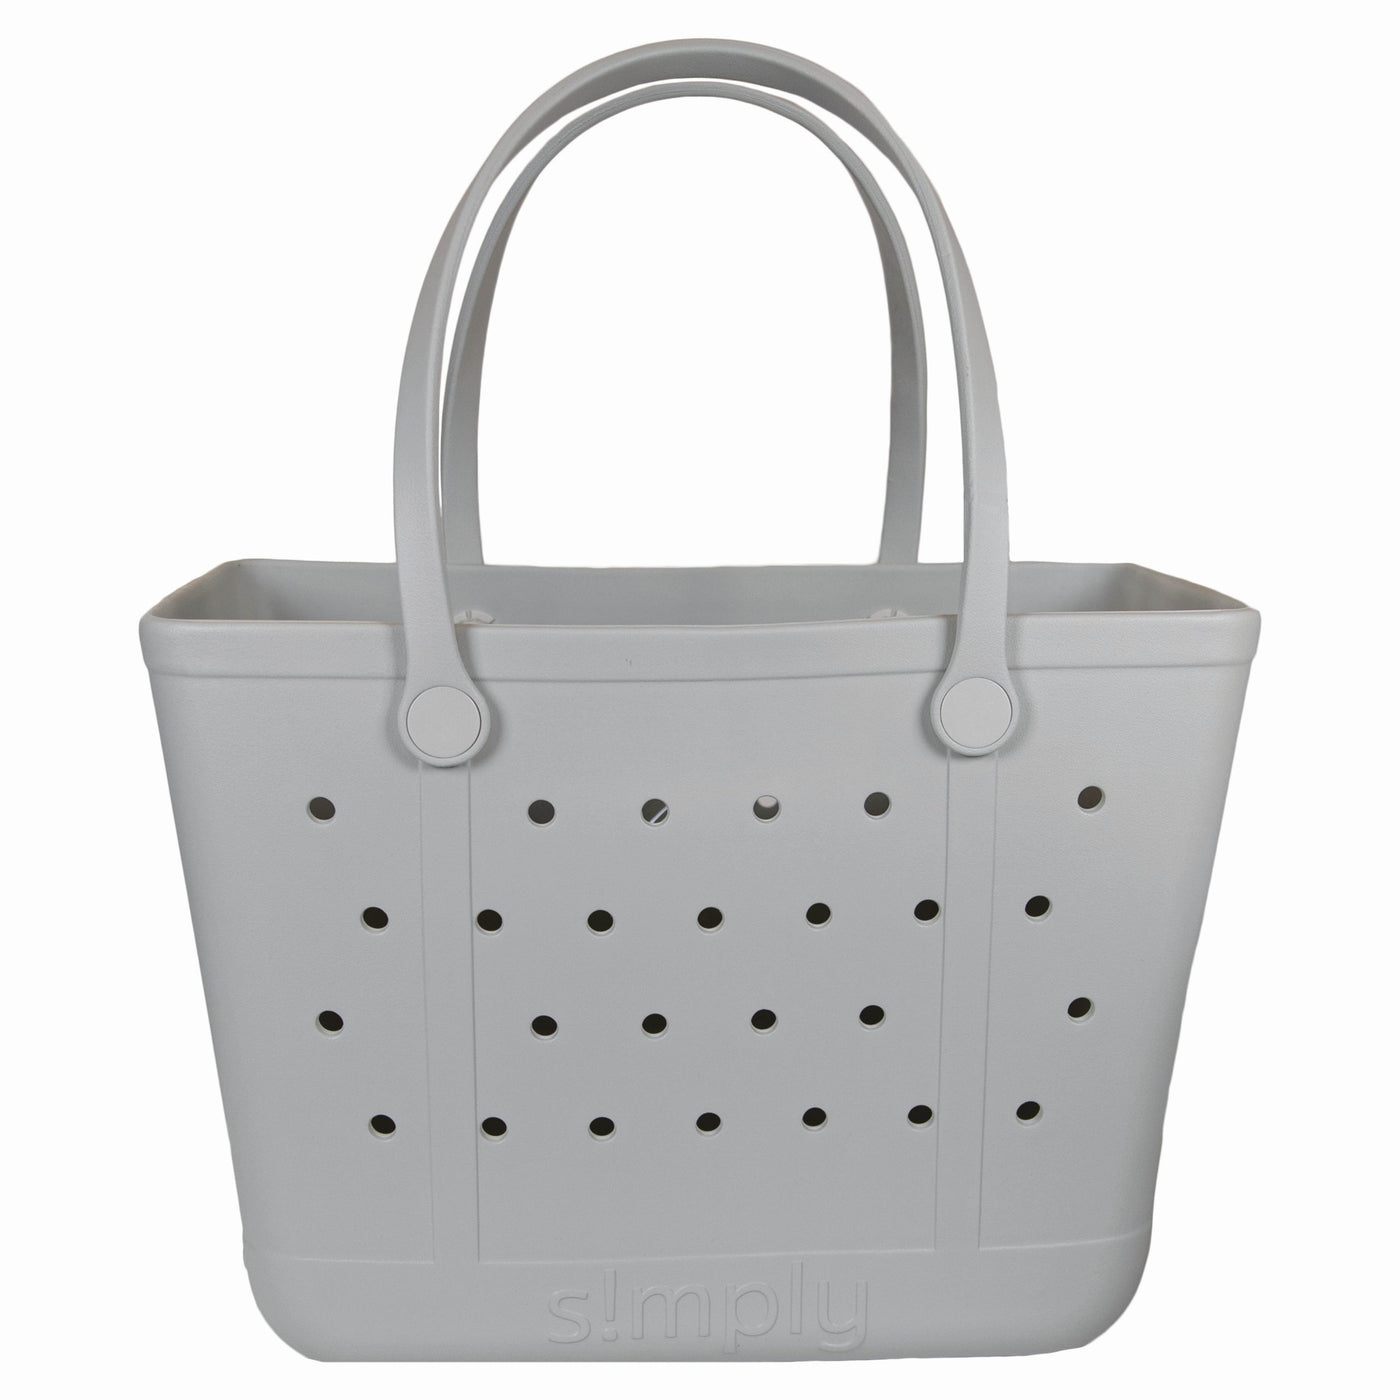 Simply Southern Large Solid Eva Tote Bag in Ice Grey |FREE SHIPPING